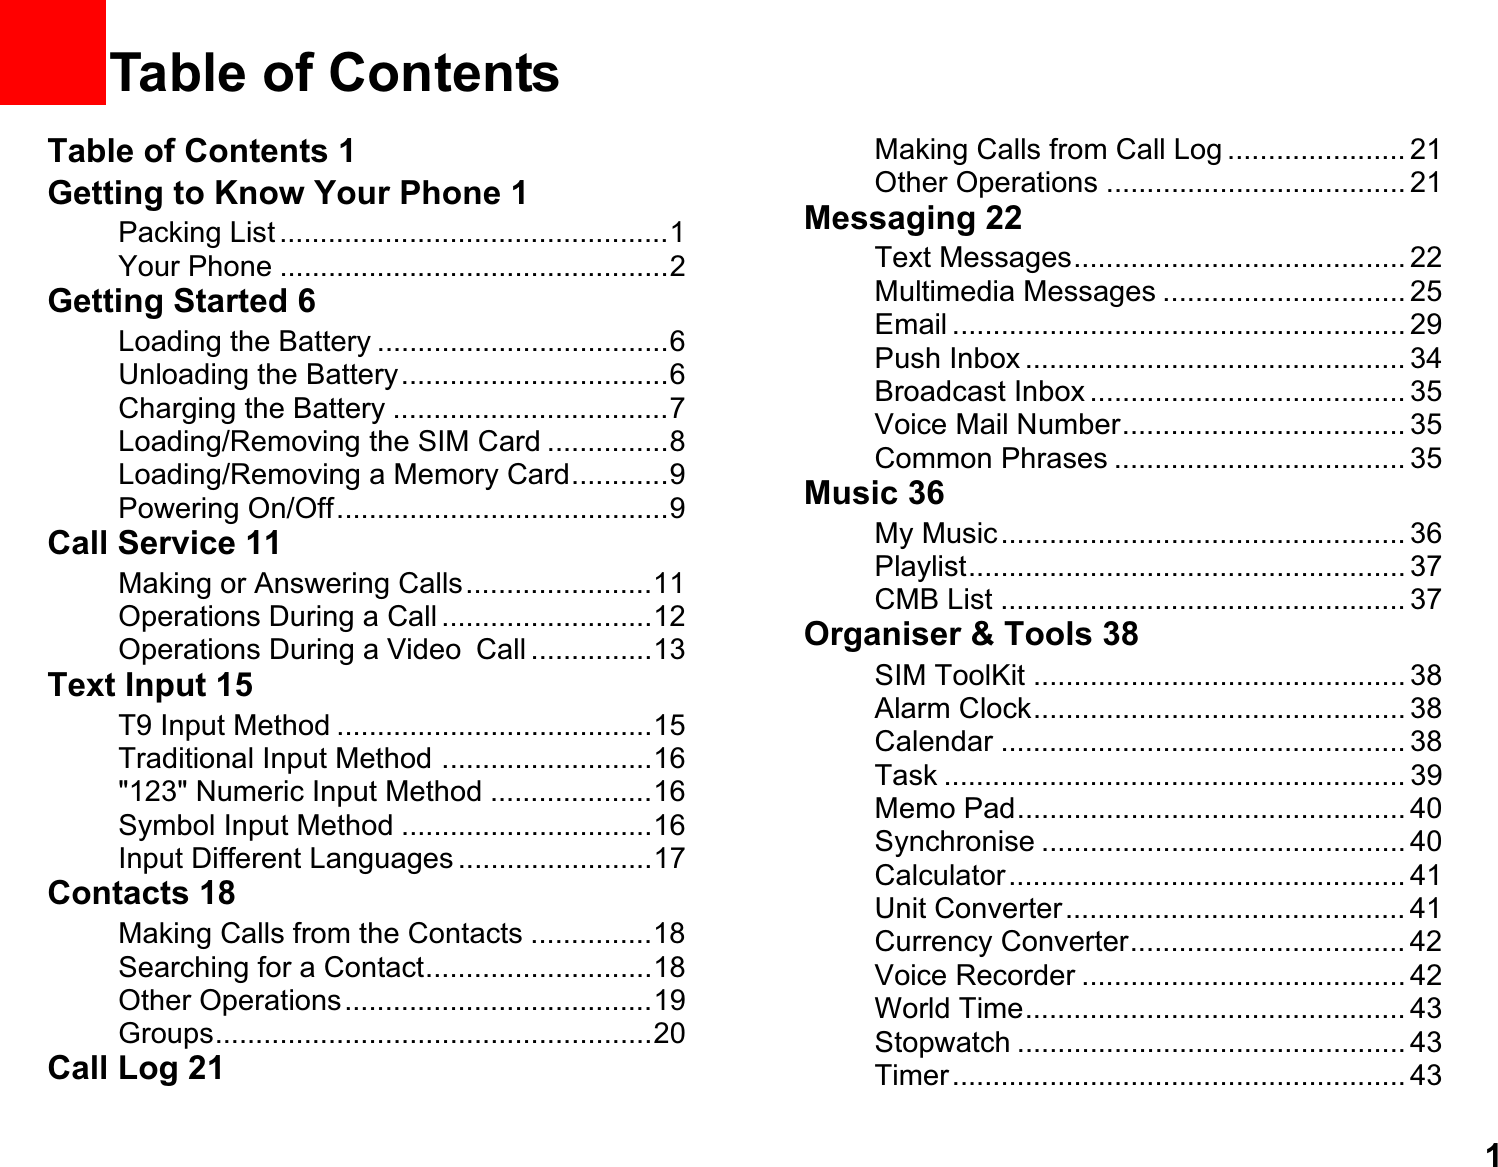 11Table of ContentsTable of Contents 1Getting to Know Your Phone 1Packing List ................................................1Your Phone ................................................2Getting Started 6Loading the Battery ....................................6Unloading the Battery.................................6Charging the Battery ..................................7Loading/Removing the SIM Card ...............8Loading/Removing a Memory Card............9Powering On/Off.........................................9Call Service 11Making or Answering Calls.......................11Operations During a Call ..........................12Operations During a VideoCall ...............13Text Input 15T9 Input Method .......................................15Traditional Input Method ..........................16&quot;123&quot; Numeric Input Method ....................16Symbol Input Method ...............................16Input Different Languages ........................17Contacts 18Making Calls from the Contacts ...............18Searching for a Contact............................18Other Operations......................................19Groups......................................................20Call Log 21Making Calls from Call Log ...................... 21Other Operations ..................................... 21Messaging 22Text Messages......................................... 22Multimedia Messages .............................. 25Email ........................................................ 29Push Inbox ............................................... 34Broadcast Inbox ....................................... 35Voice Mail Number................................... 35Common Phrases .................................... 35Music 36My Music.................................................. 36Playlist...................................................... 37CMB List .................................................. 37Organiser &amp; Tools 38SIM ToolKit .............................................. 38Alarm Clock.............................................. 38Calendar .................................................. 38Task ......................................................... 39Memo Pad................................................ 40Synchronise ............................................. 40Calculator................................................. 41Unit Converter.......................................... 41Currency Converter.................................. 42Voice Recorder ........................................ 42World Time............................................... 43Stopwatch ................................................ 43Timer........................................................ 43